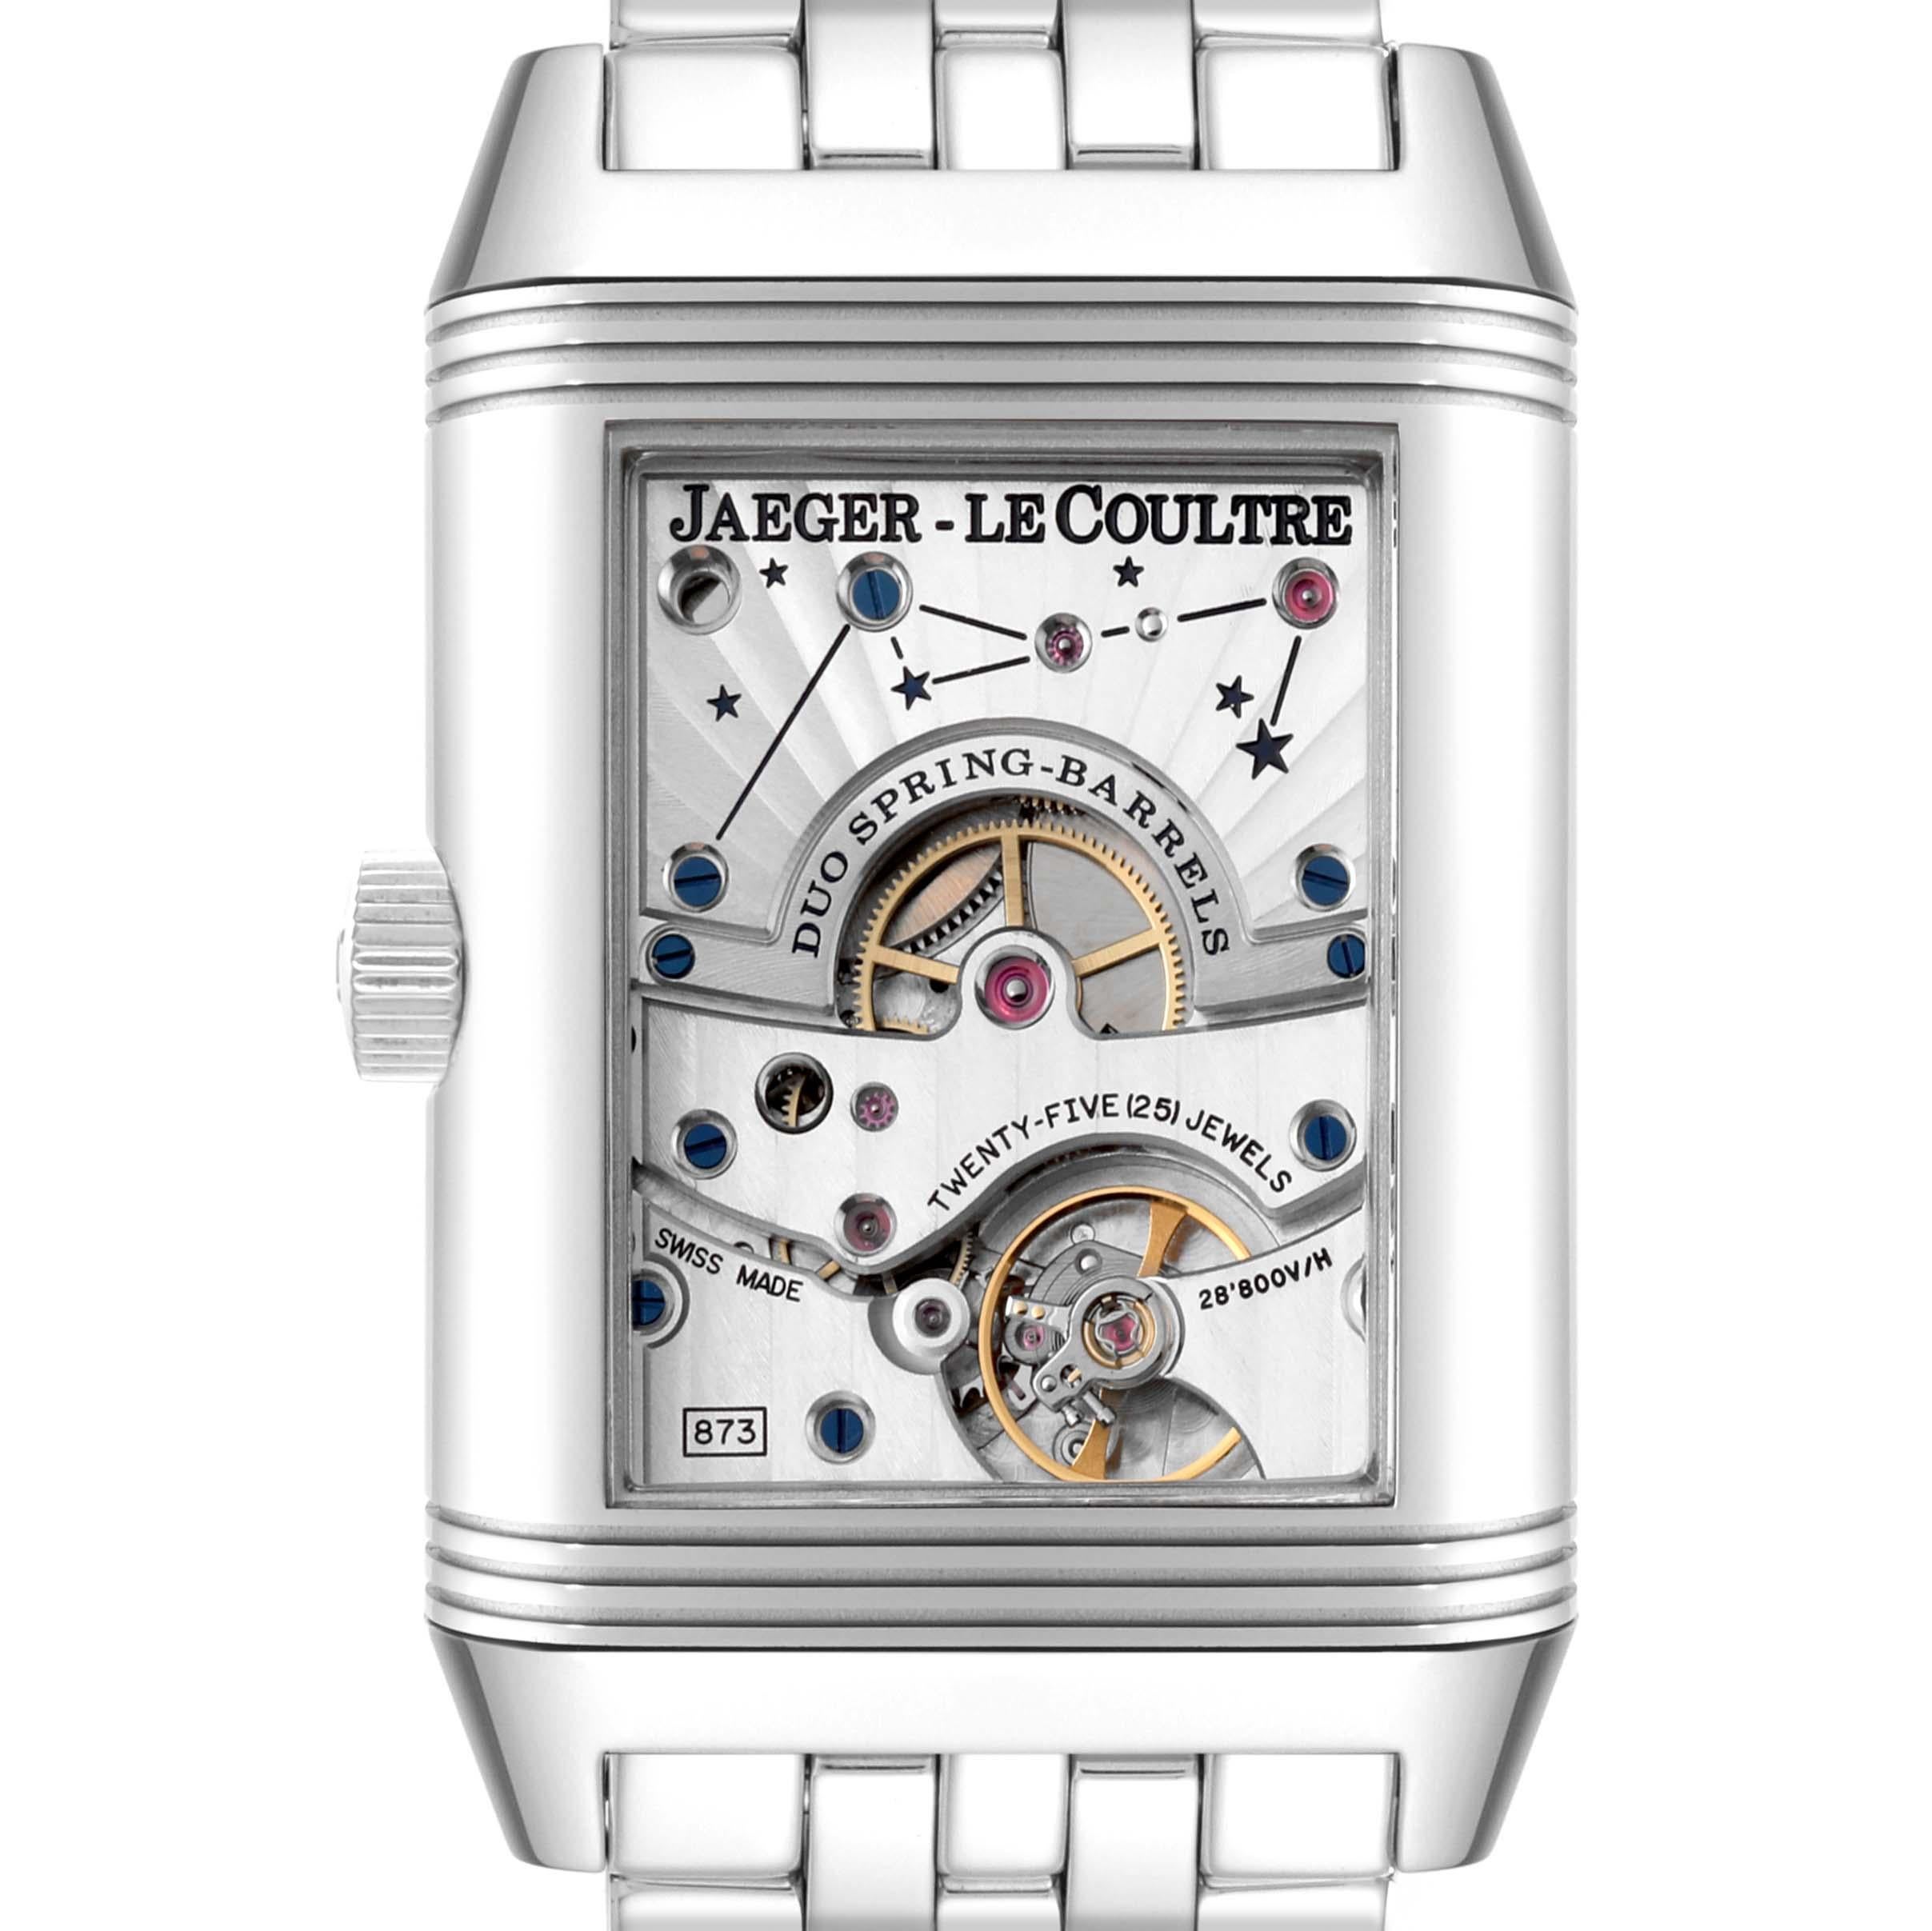 Jaeger LeCoultre Reverso Grande Sun Moon Steel Mens Watch 240.8.27 Q3048120. Manual winding movement with 8 day power reserve. Stainless steel 46.0 x 29.0 mm rectangular rotating case. Inner transparent exhibition sapphire crystal caseback.